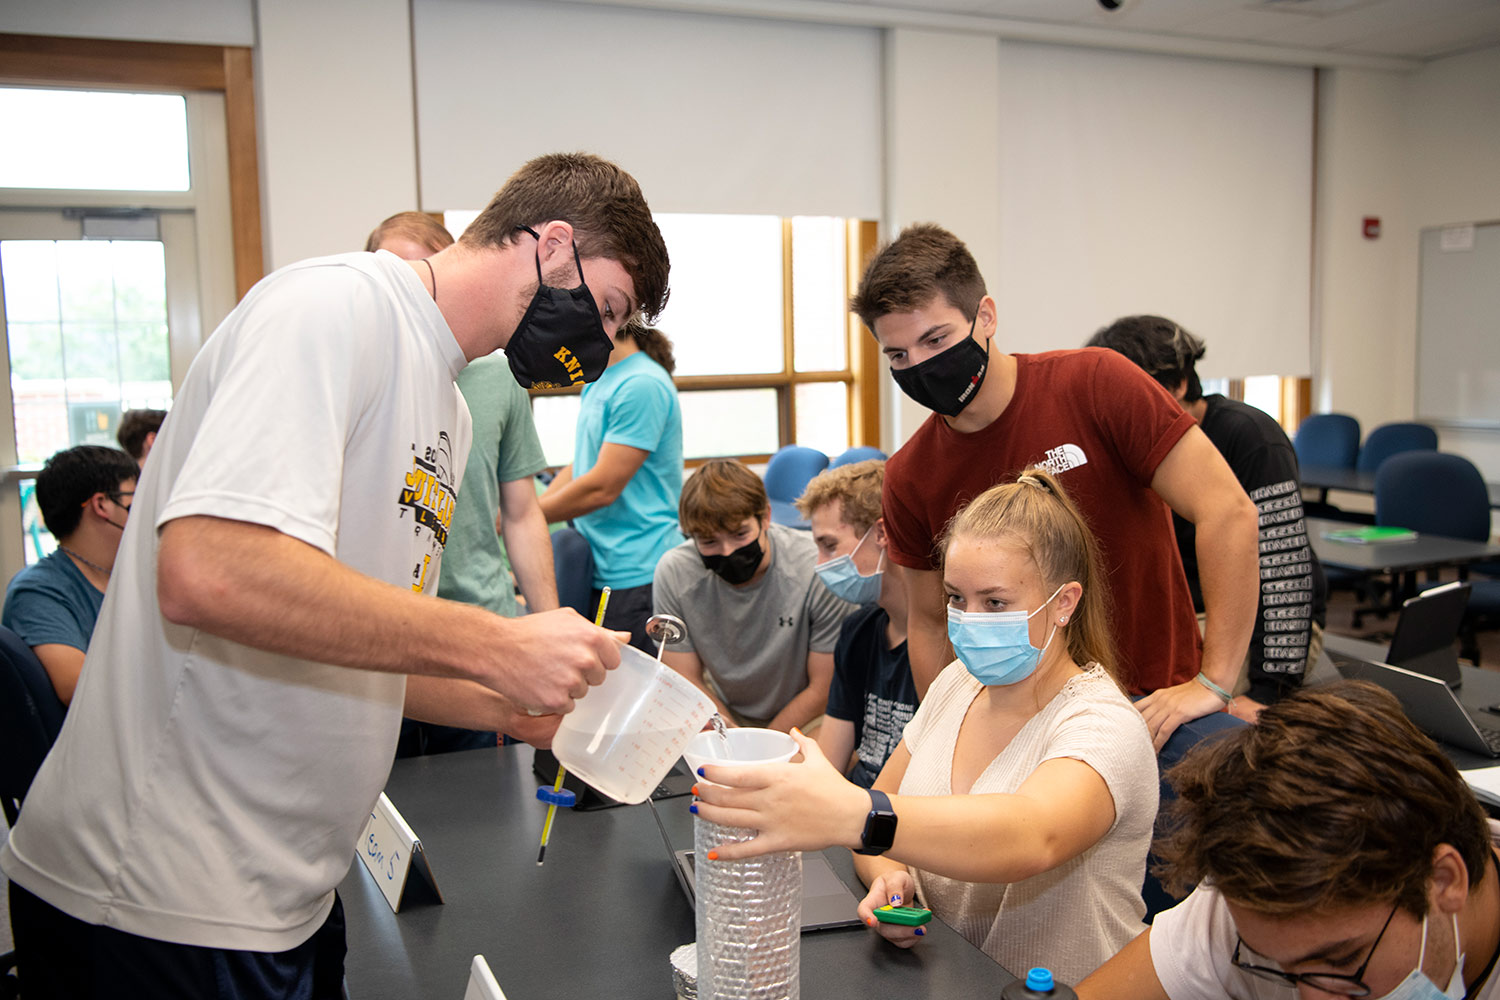 A photograph taken of a student group activity inside a ENGR 100 course at the Bucknell College of Engineering building